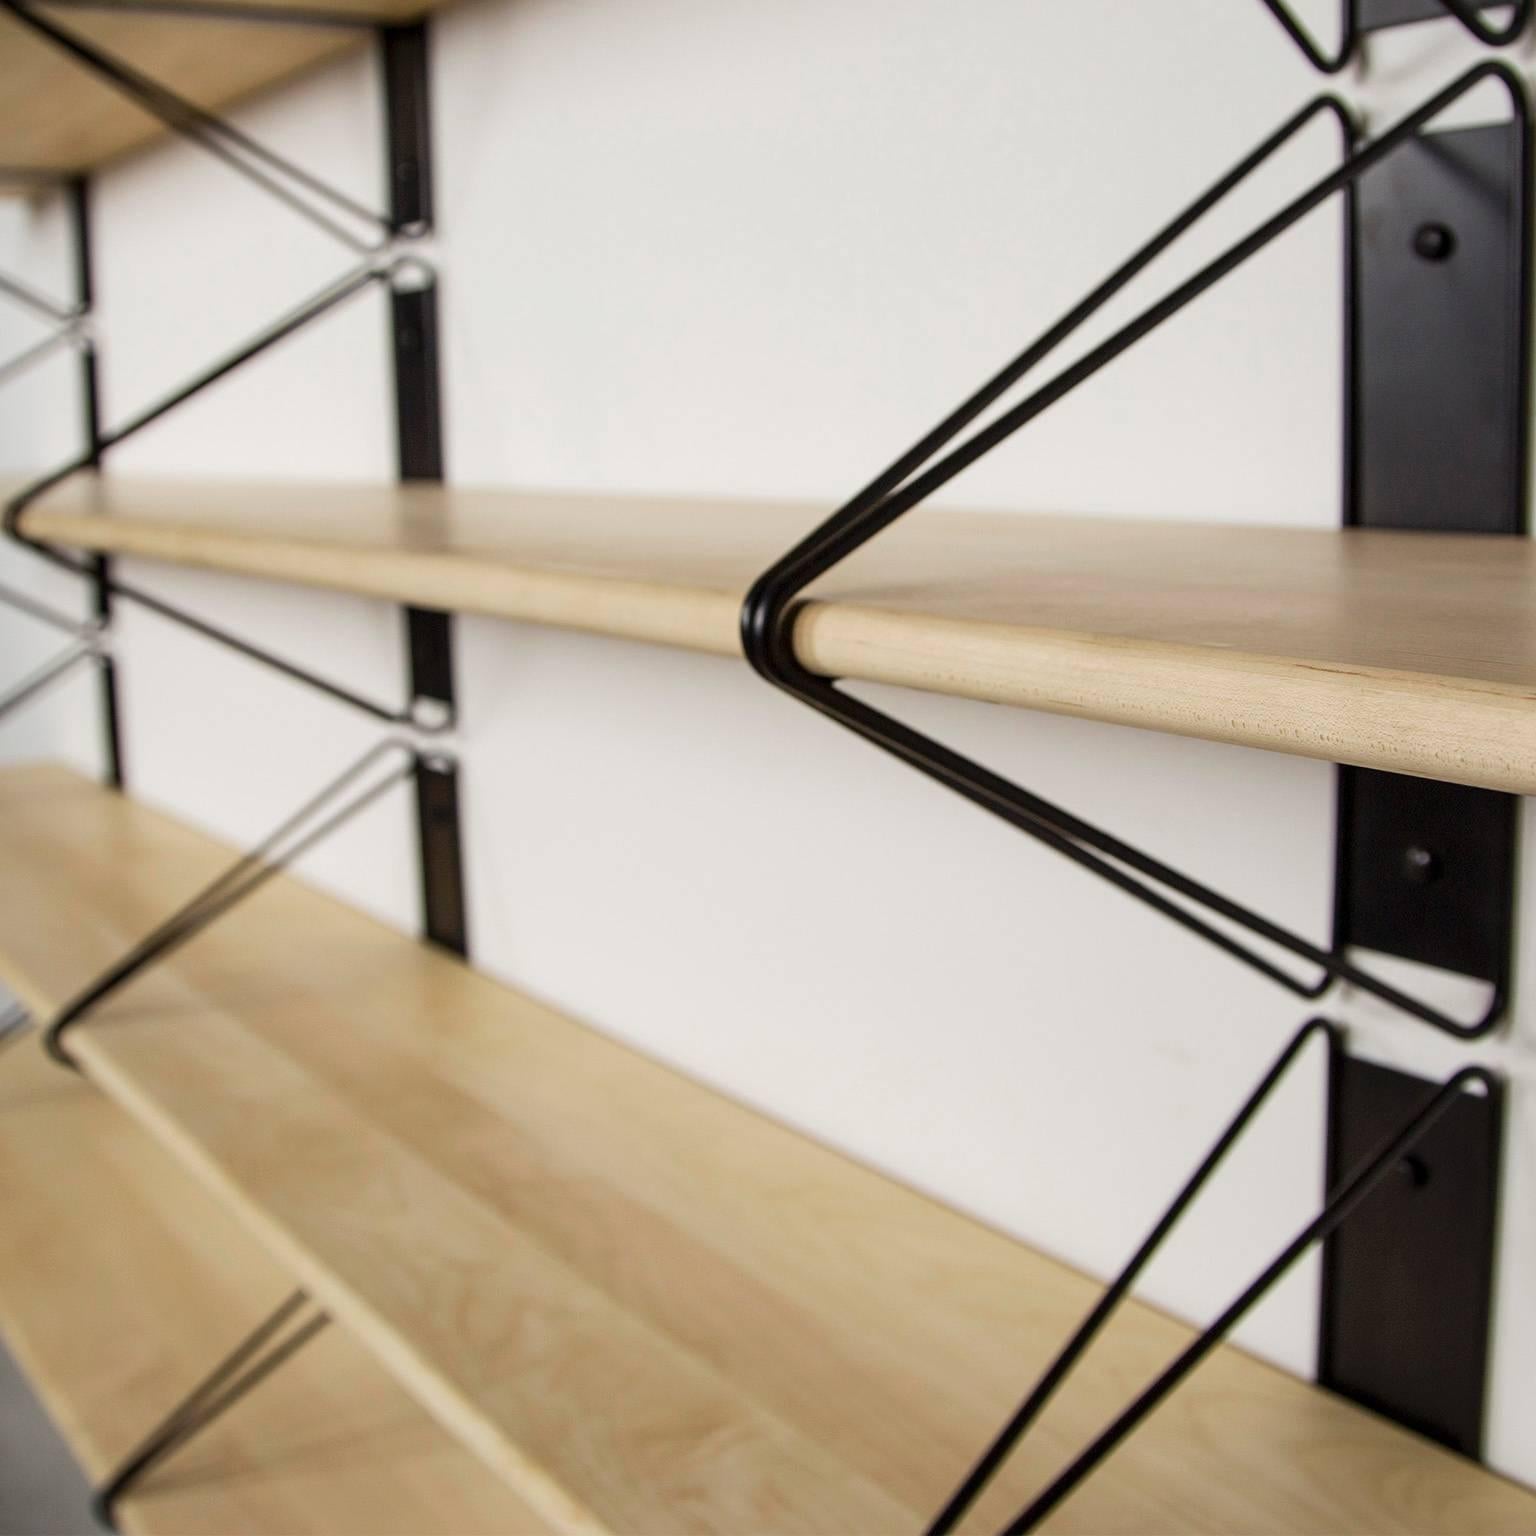 Oiled Set of 2 Strut Shelves from Souda, Black and Maple, Made to Order For Sale